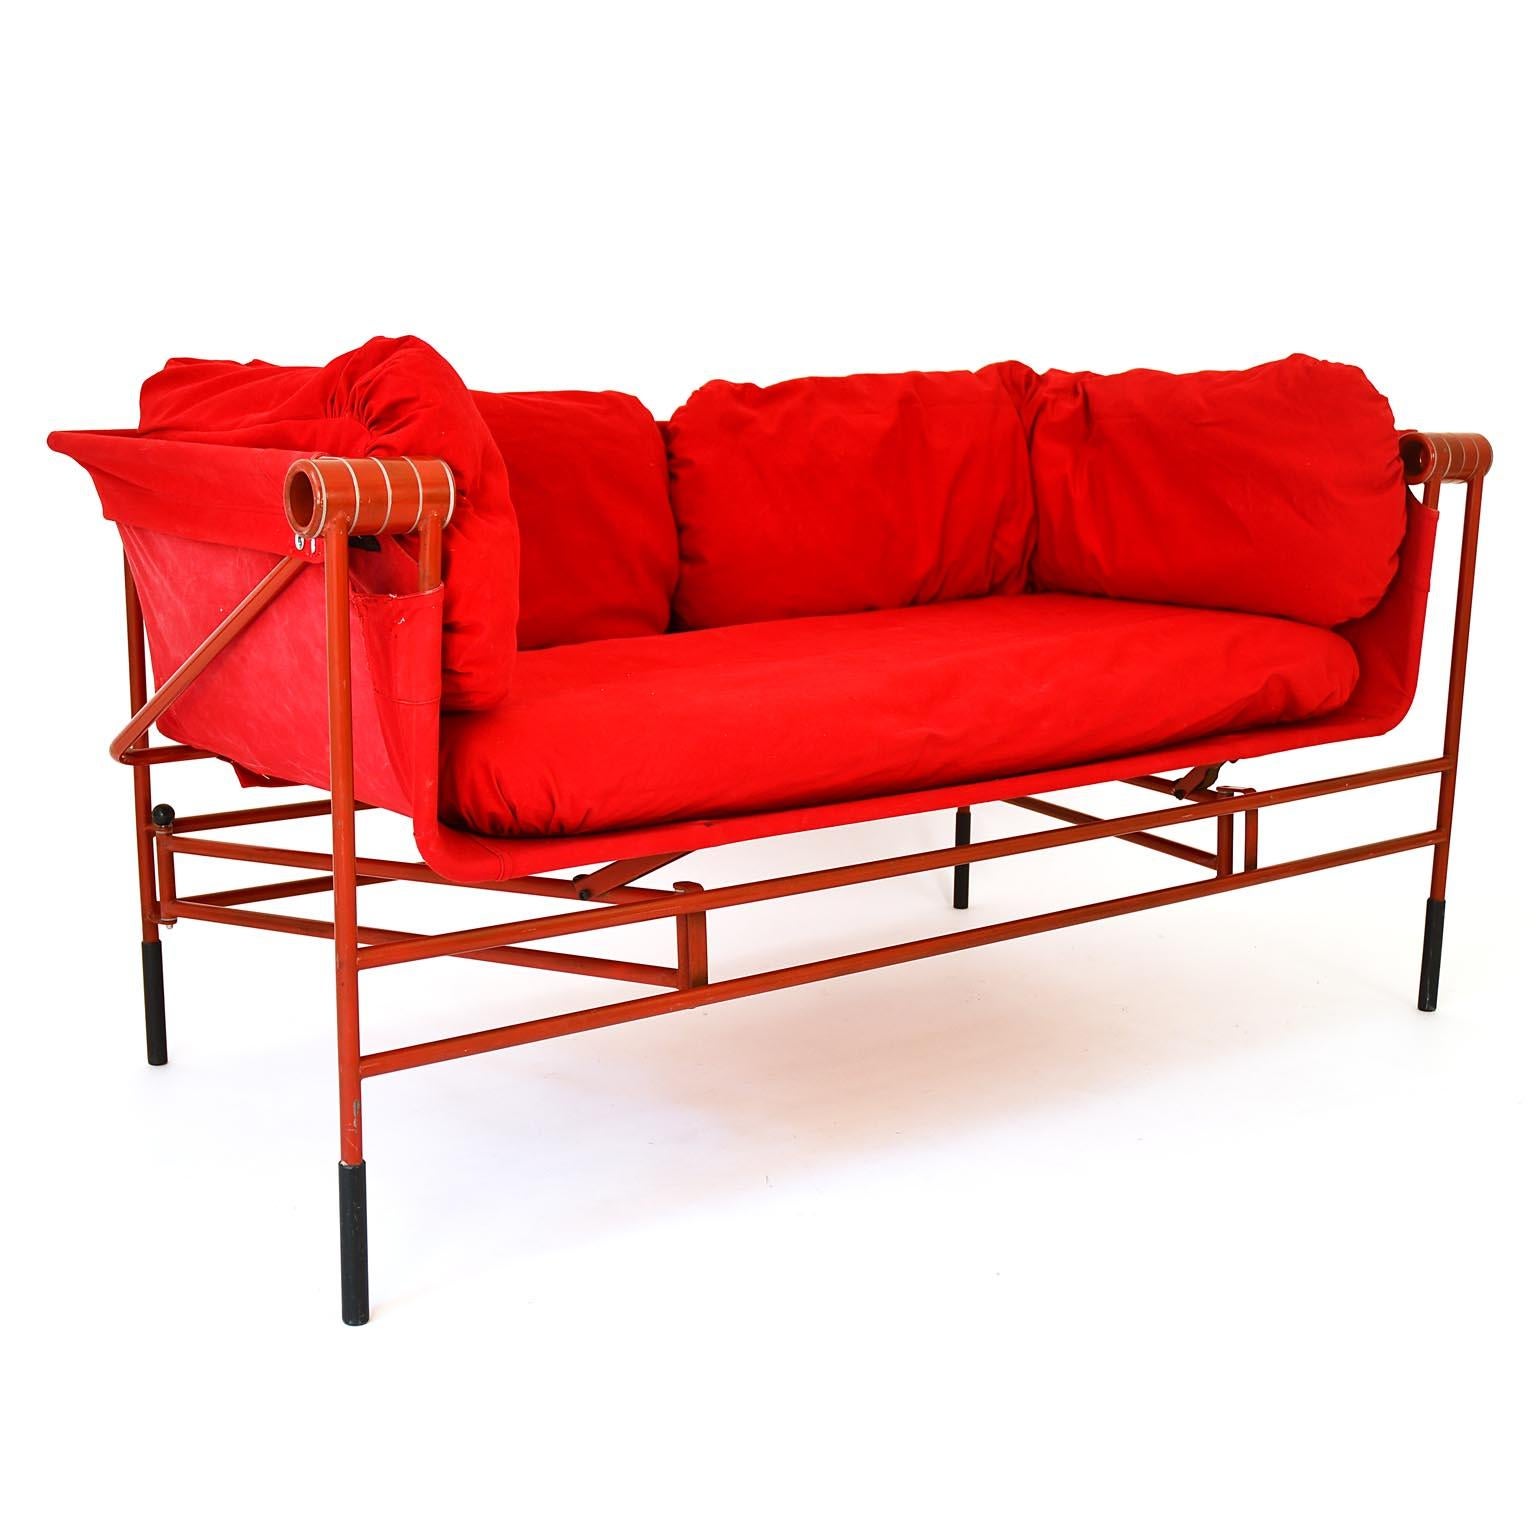 Late 20th Century Bench Cabriolet 1980s Red Fabrik Metal Bruno Rota Italy